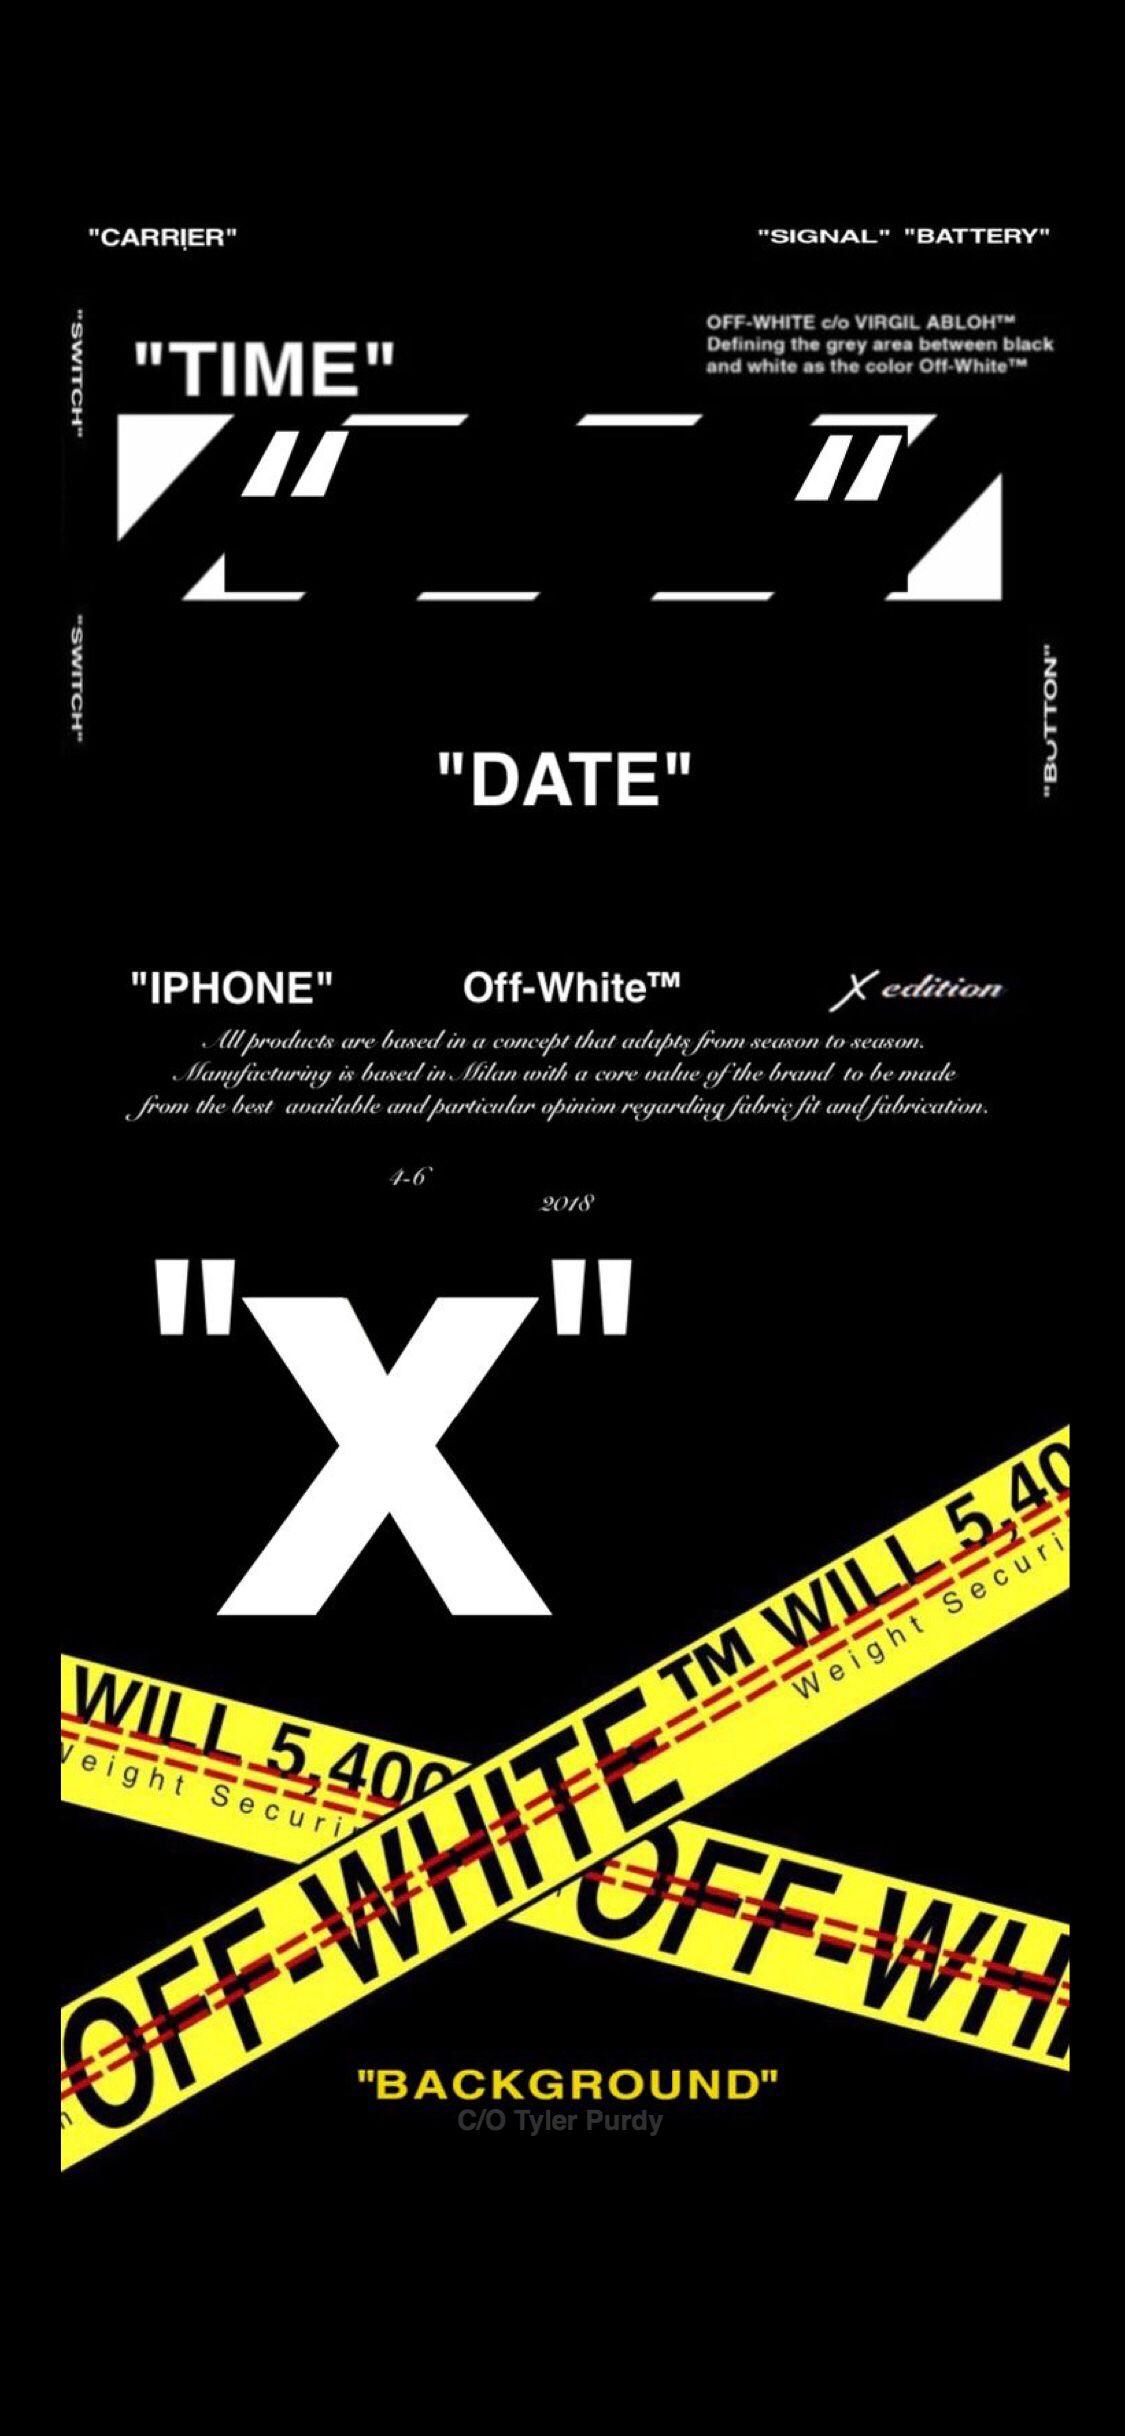 iphone x off white wallpapers